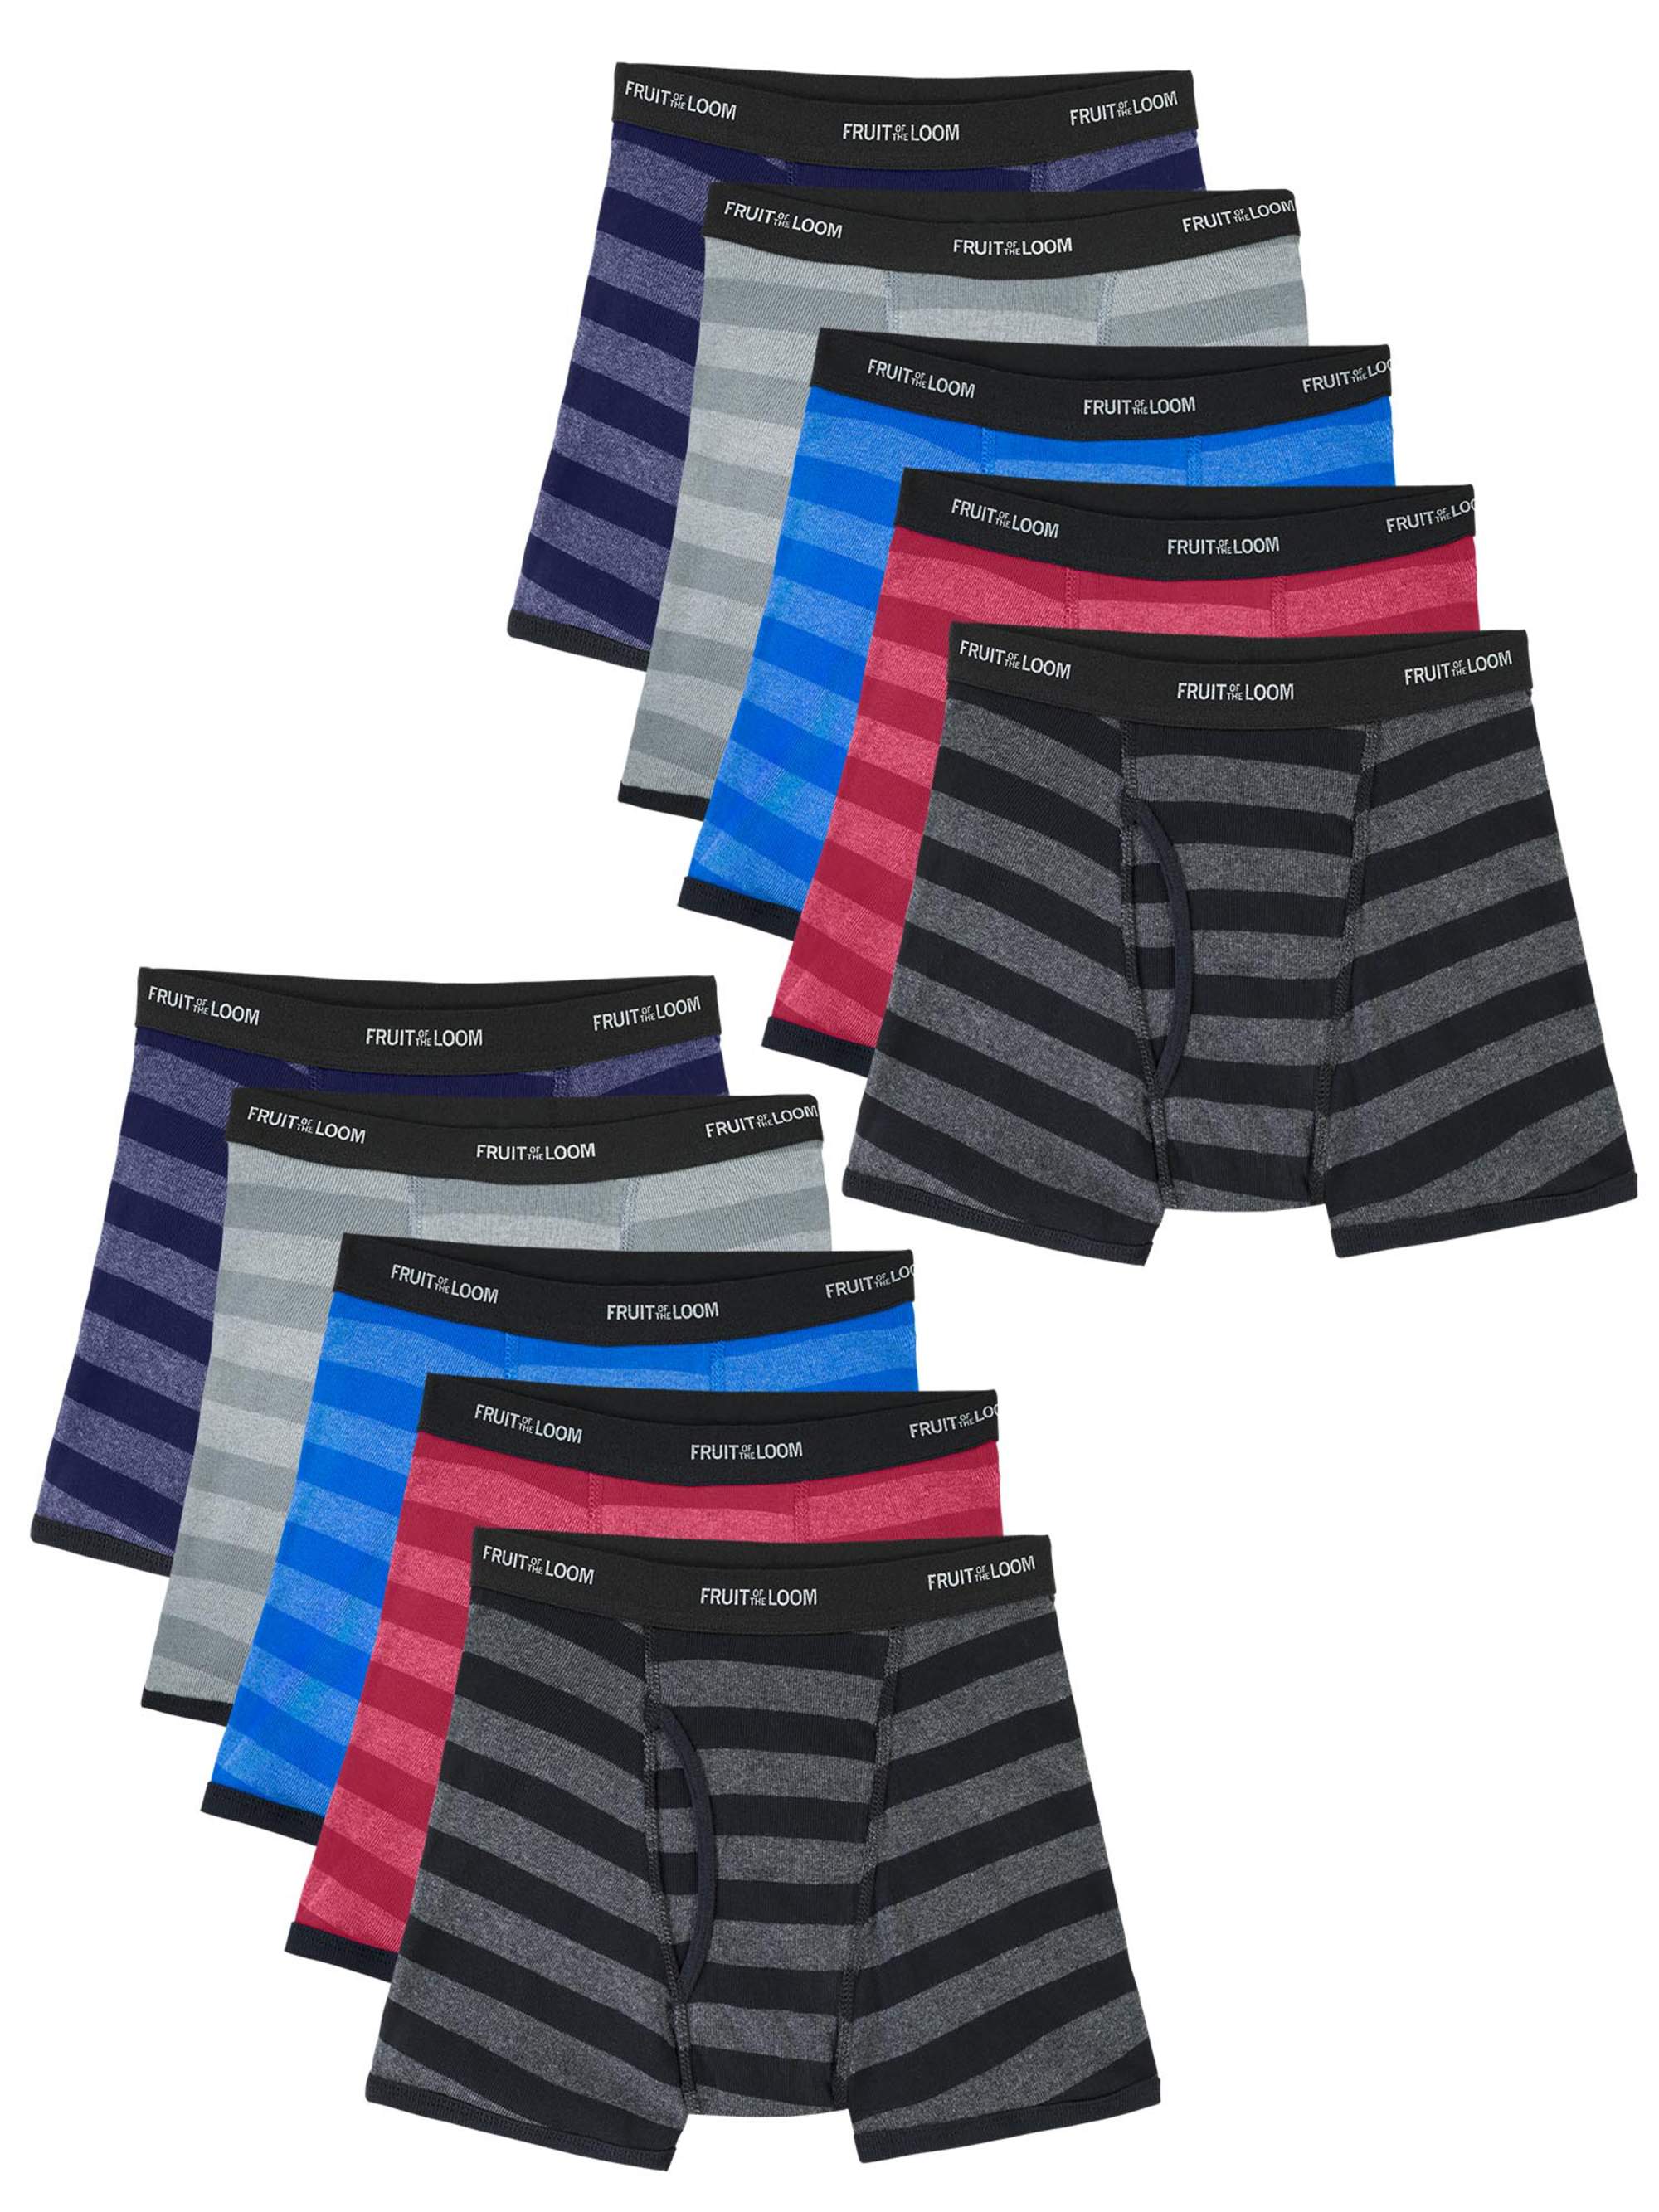 Fruit of the Loom Boys Underwear, 10 Pack Striped Boxer Brief Underwear, Size XL (18/20) - image 1 of 5